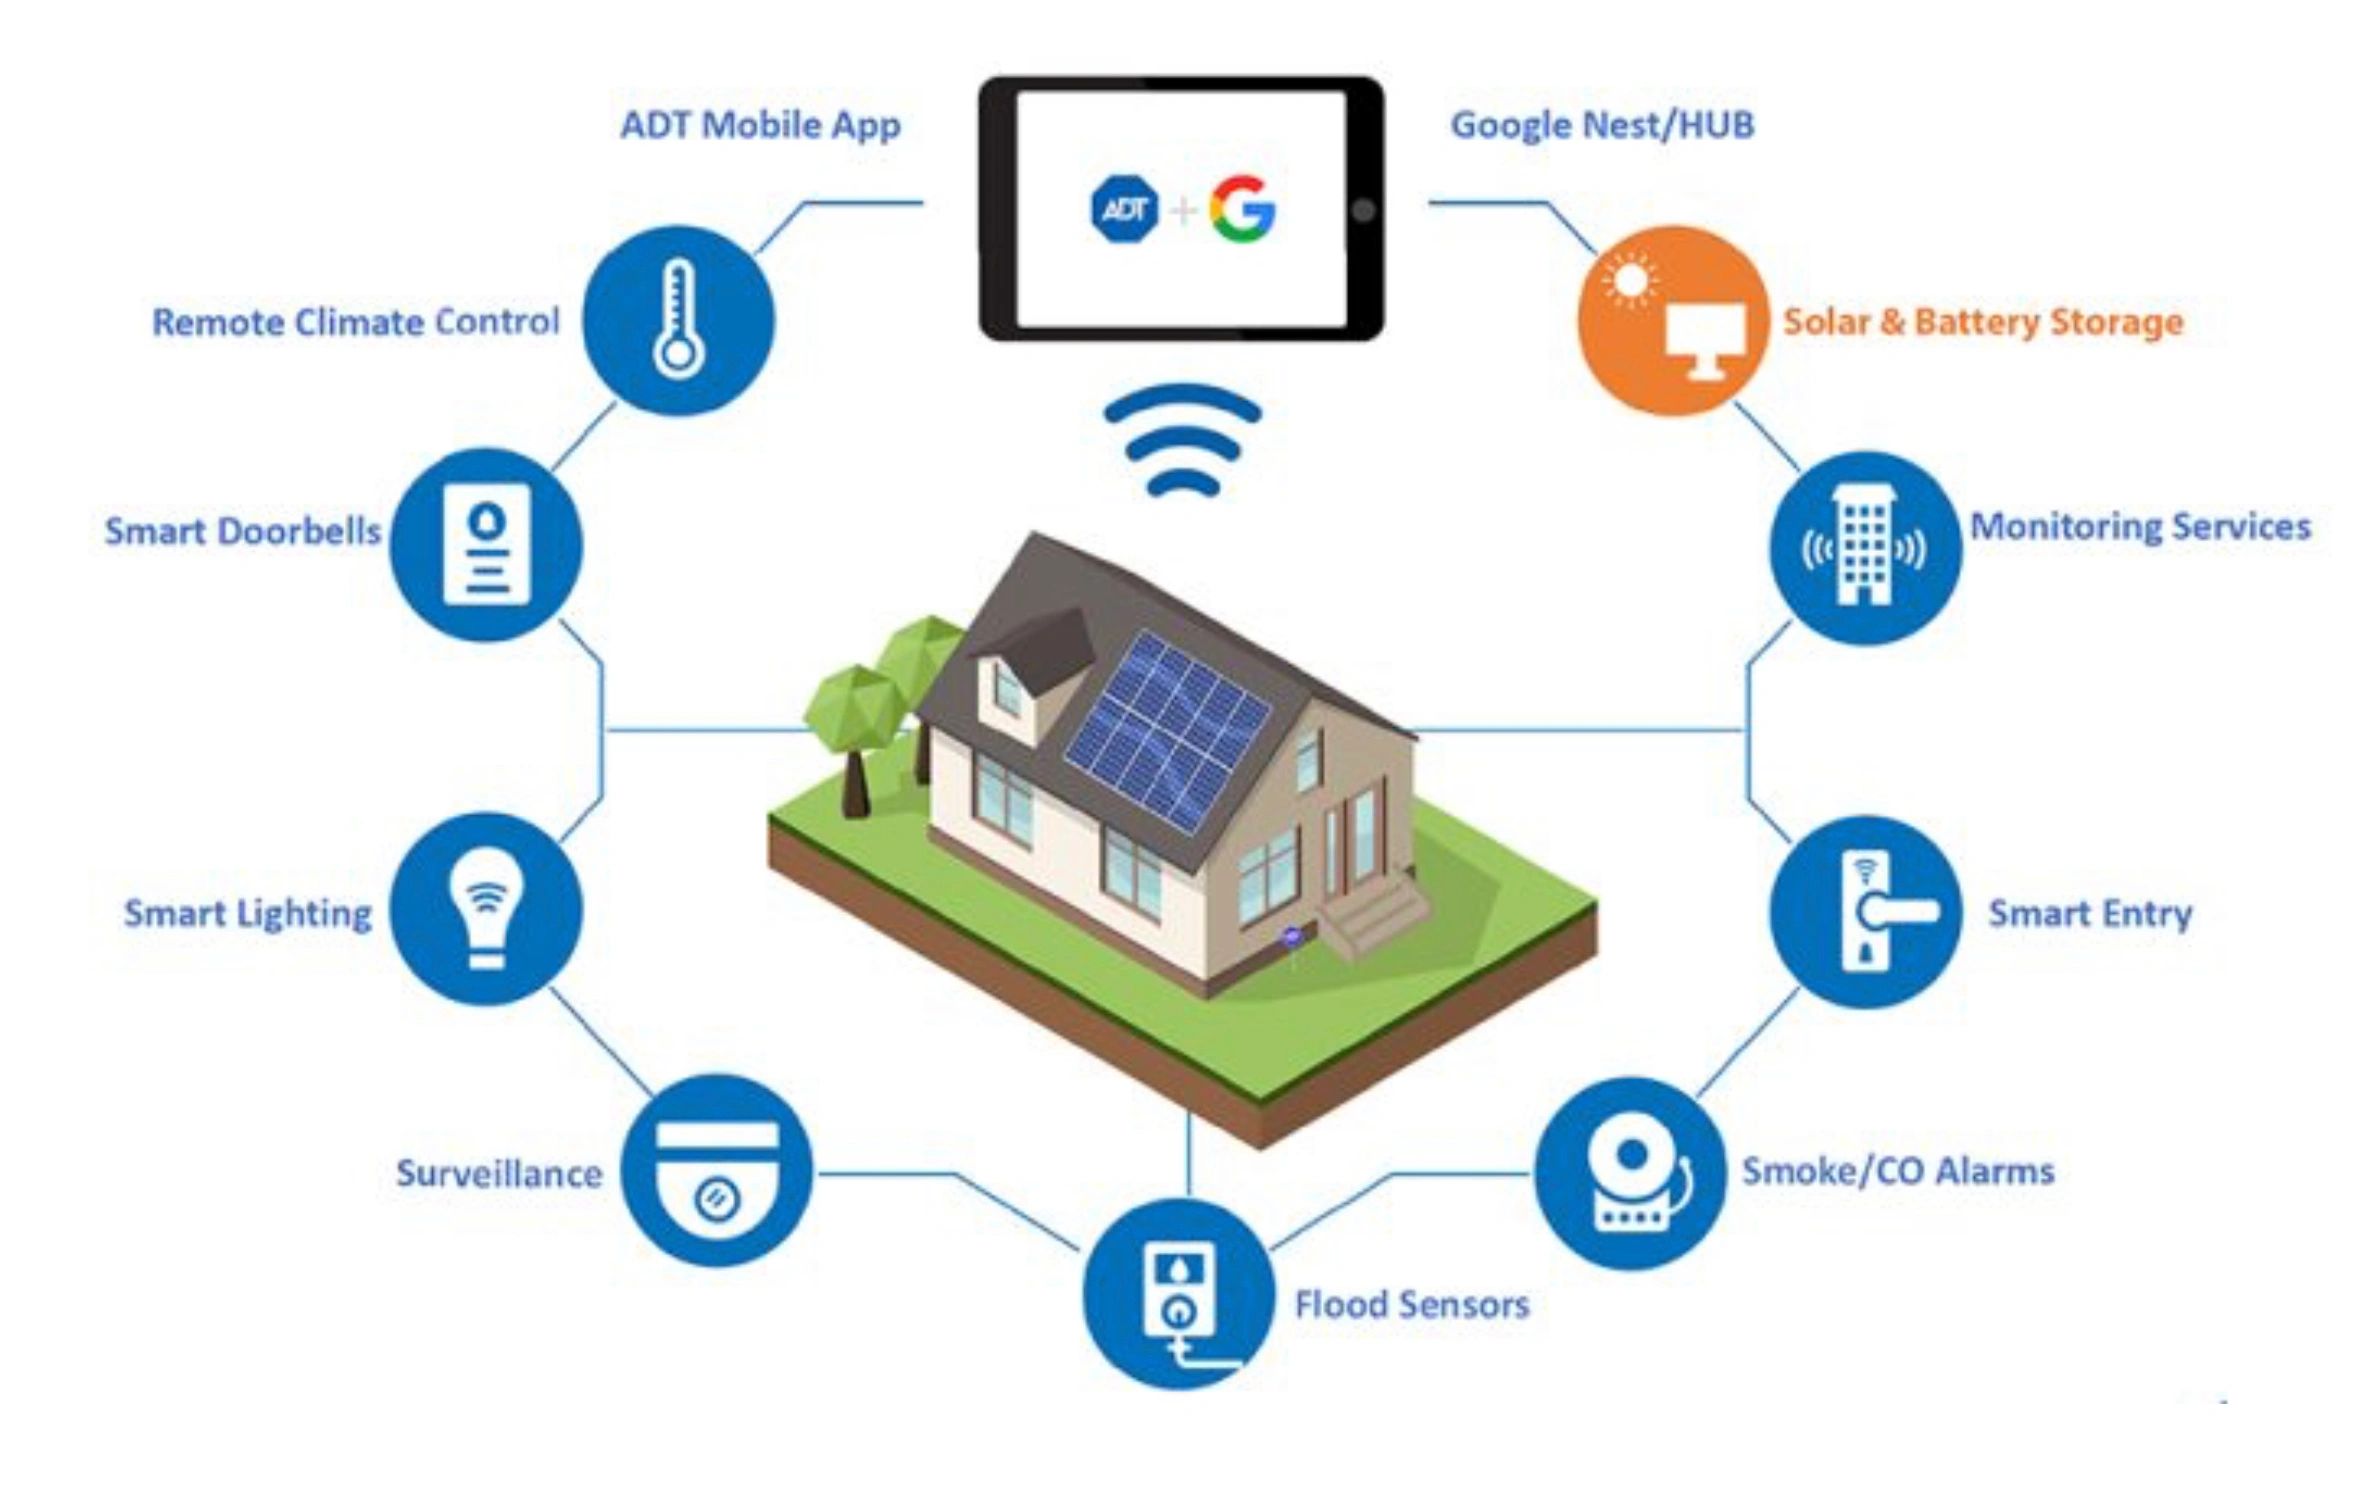 ADT Google Nest hub, solar and battery storage, monitoring services, video surveillance, smart home